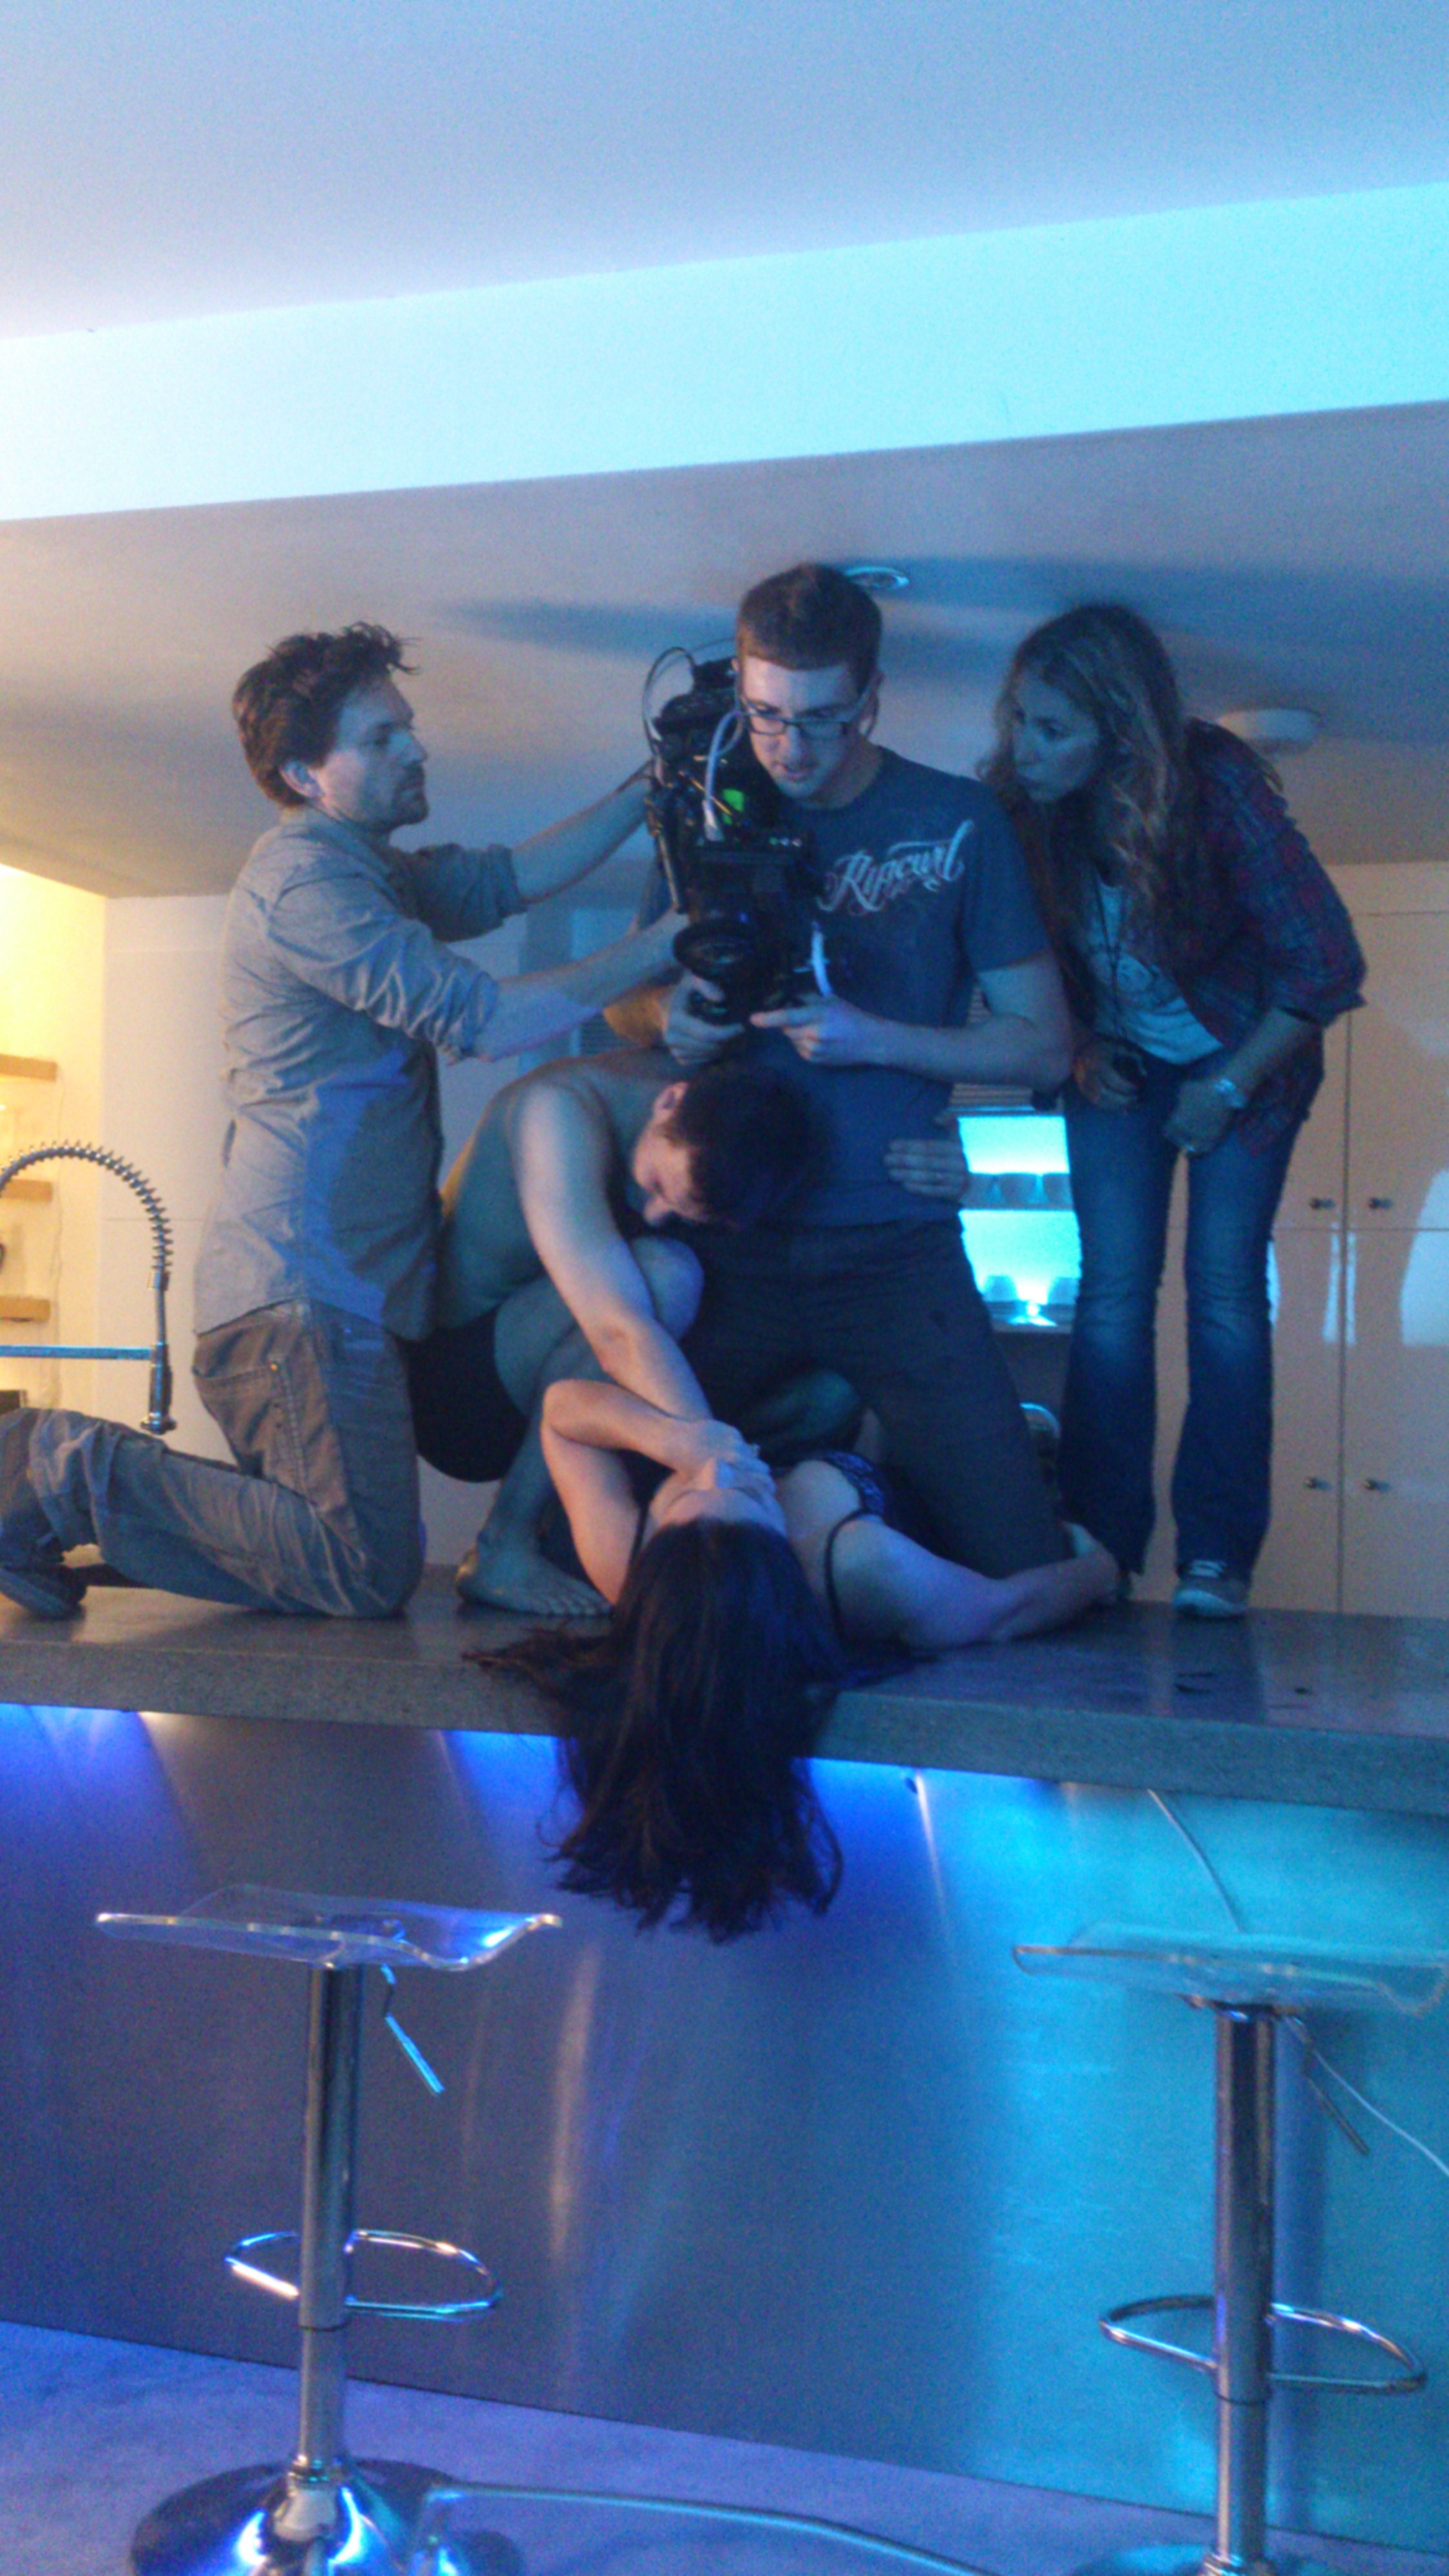 Michael Spry straddling Miranda Magee and being hugged by Christopher Slater on the set of Marriage. Flanked by the Director Katerina Philippou and Cinematographer Paul Curtis.